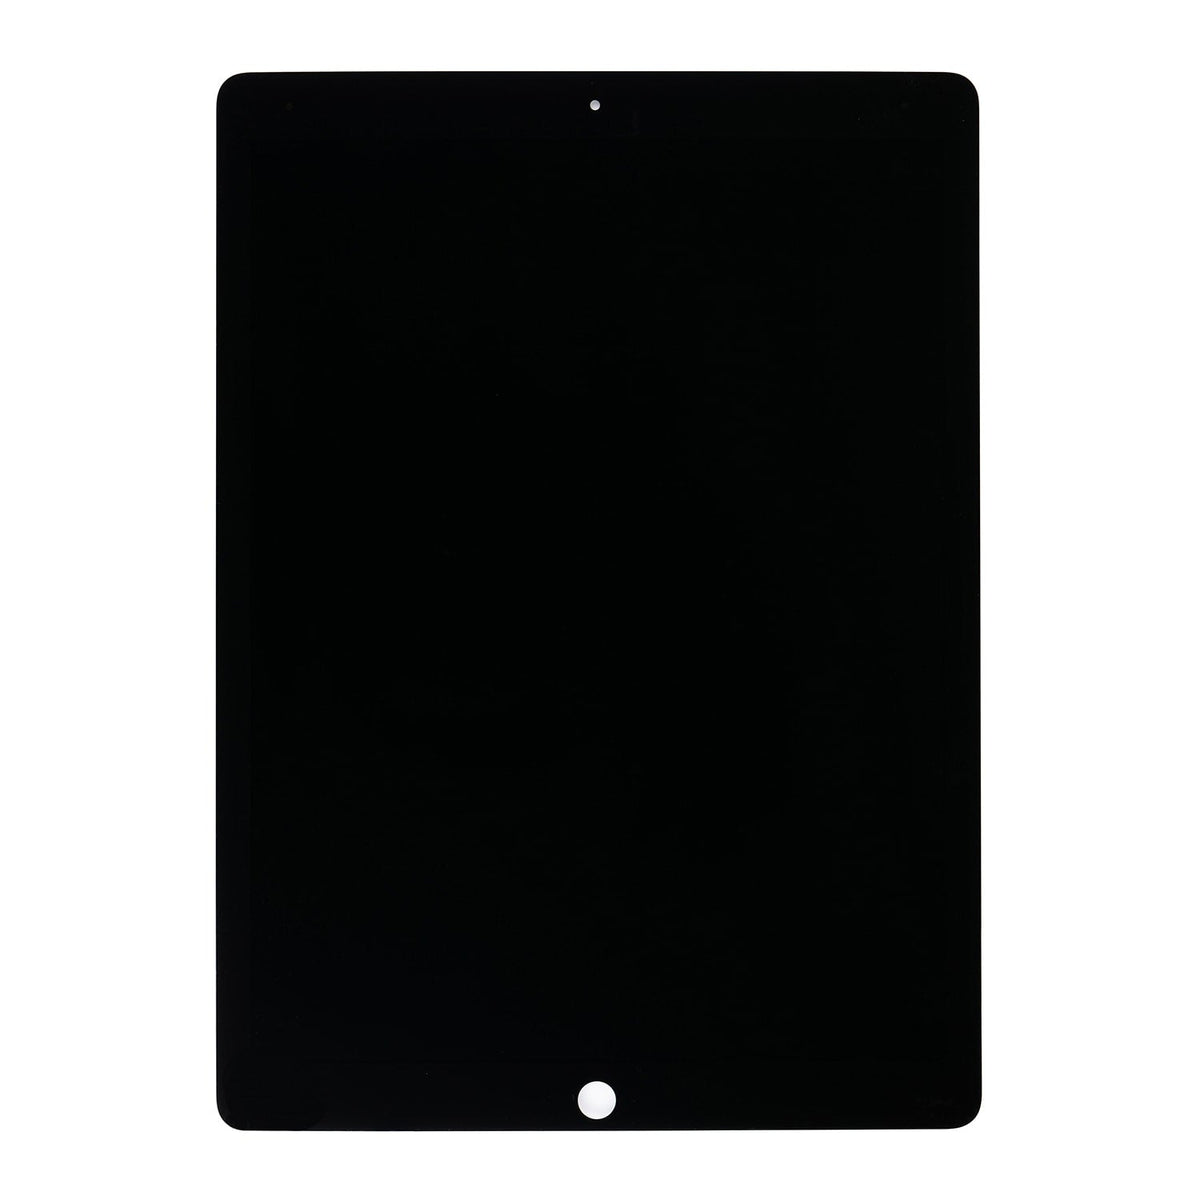 LCD SCREEN AND DIGITIZER ASSEMBLY WITH BOARD FLEX FOR IPAD PRO 12.9" 2ND GEN- (BLACK)